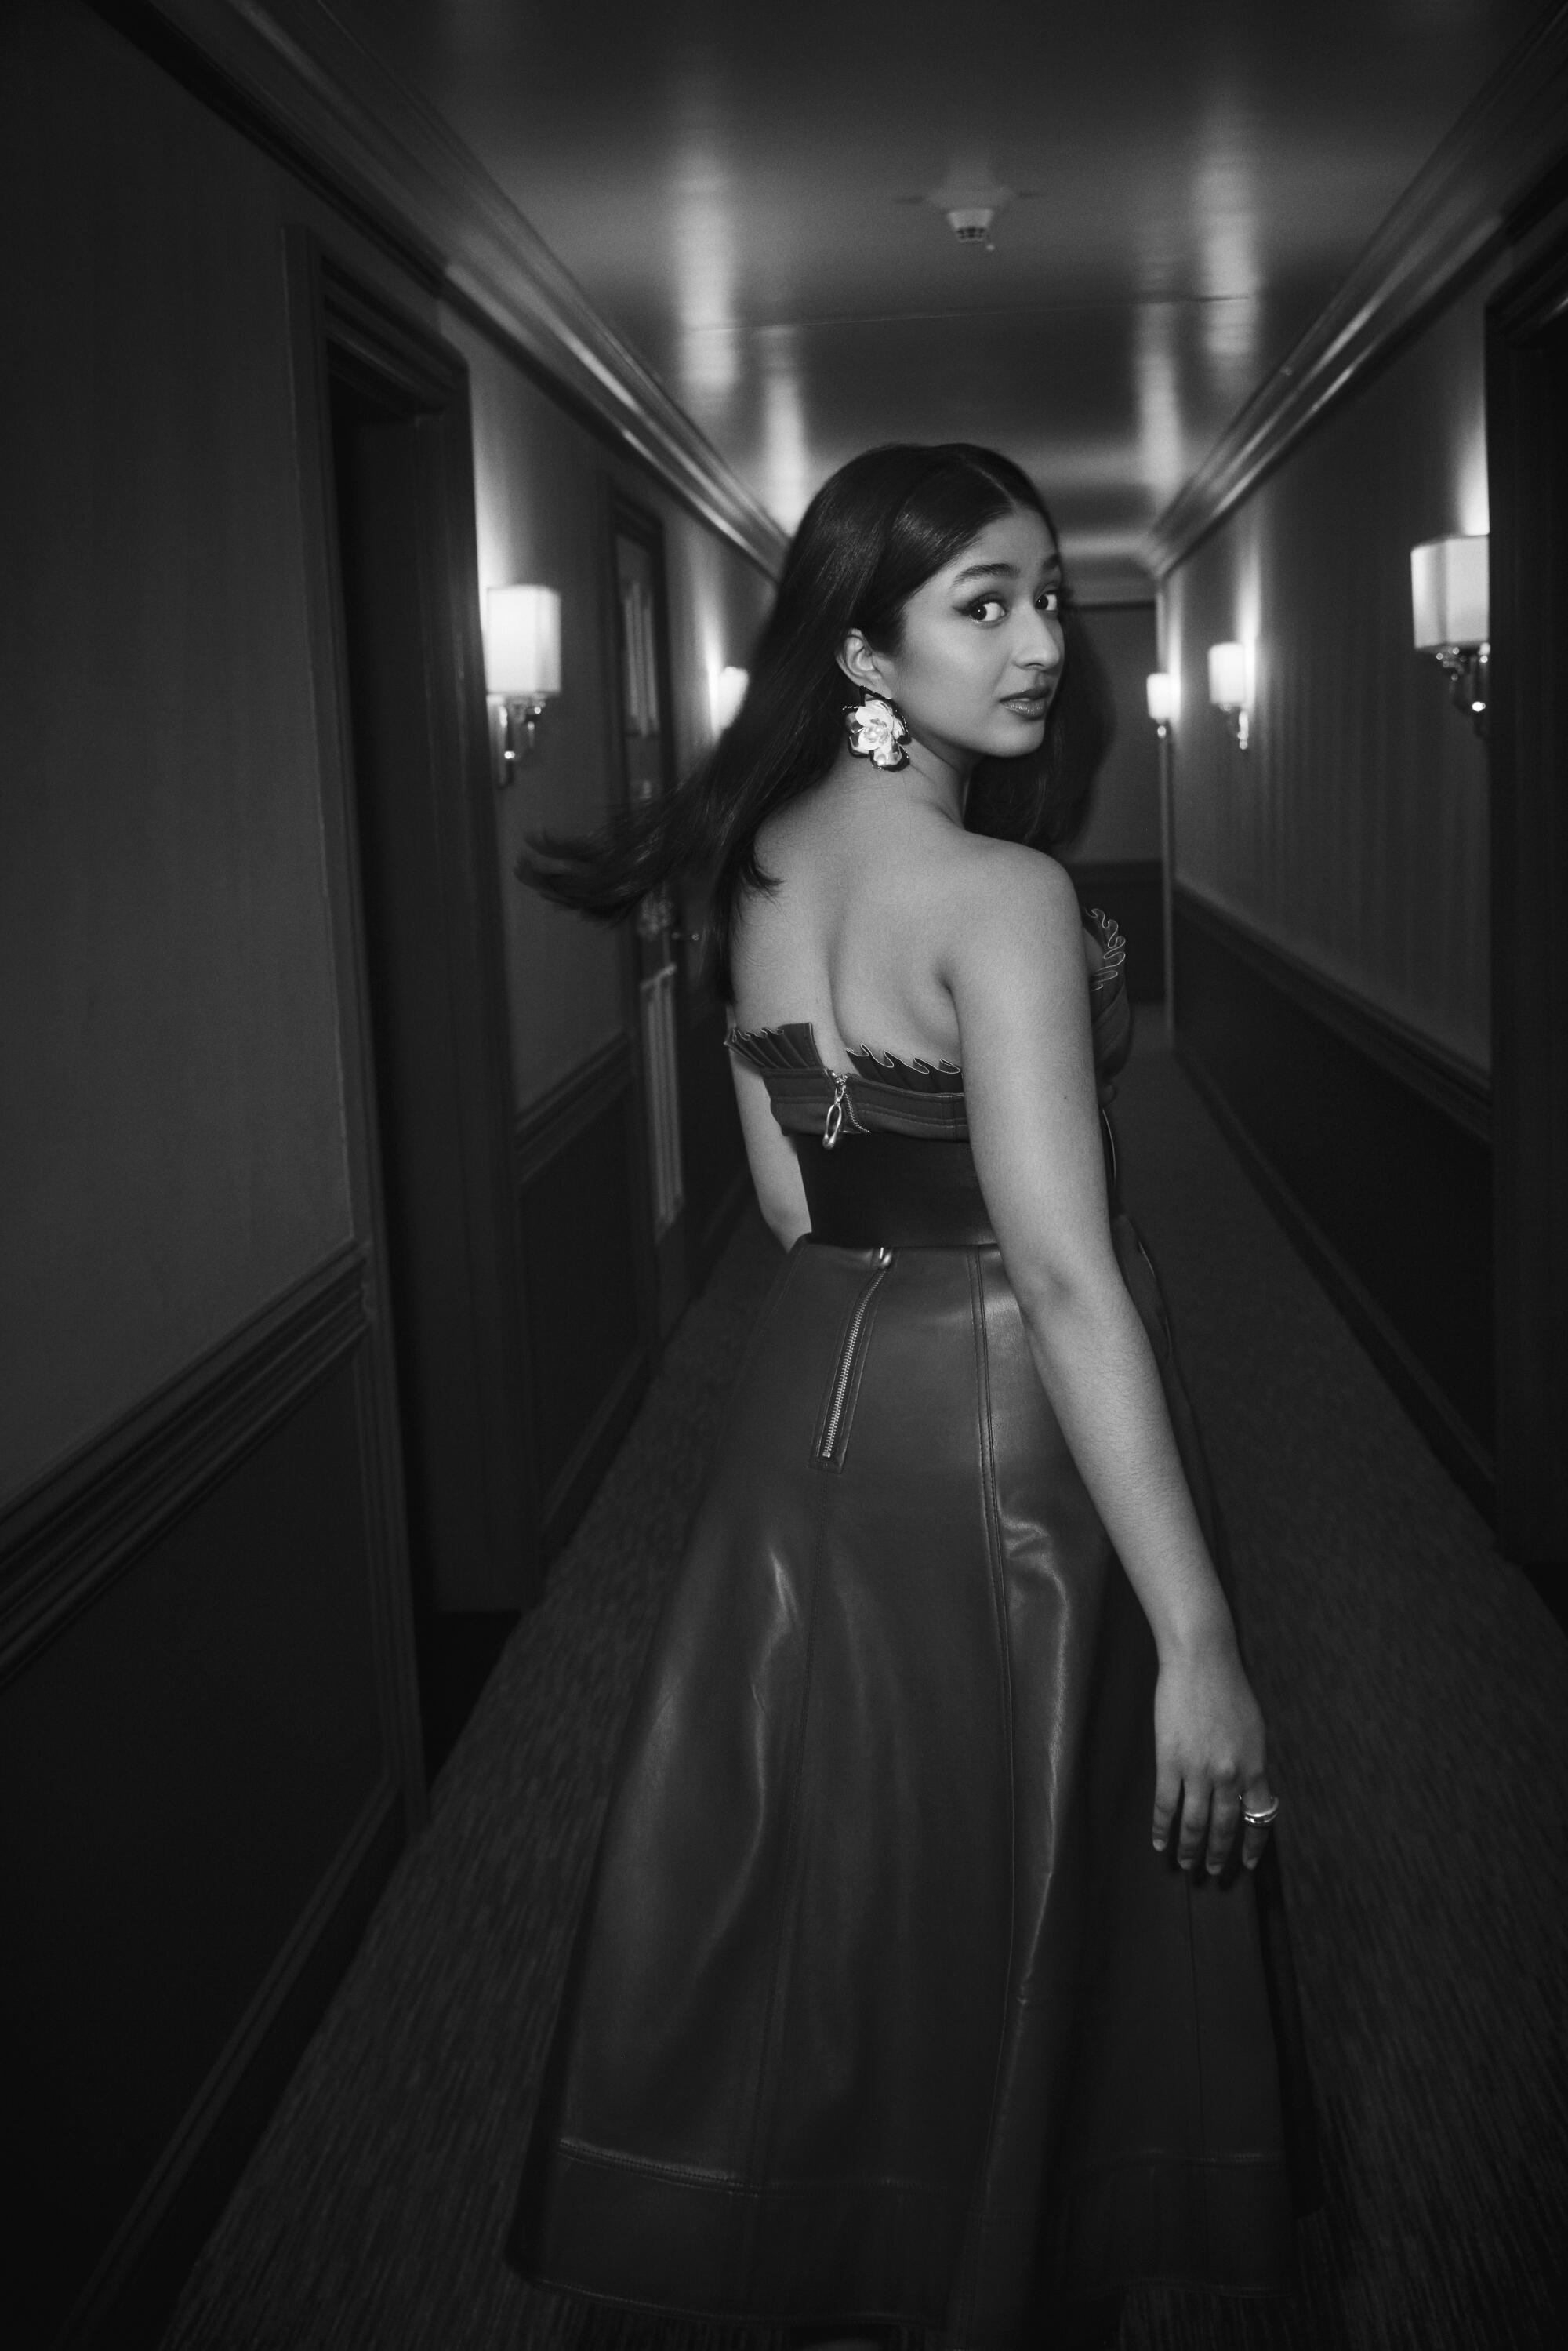 In a black-and-white photo, Maitreyi Ramakrishnan stands in a hotel hallway and looks back over her right shoulder.